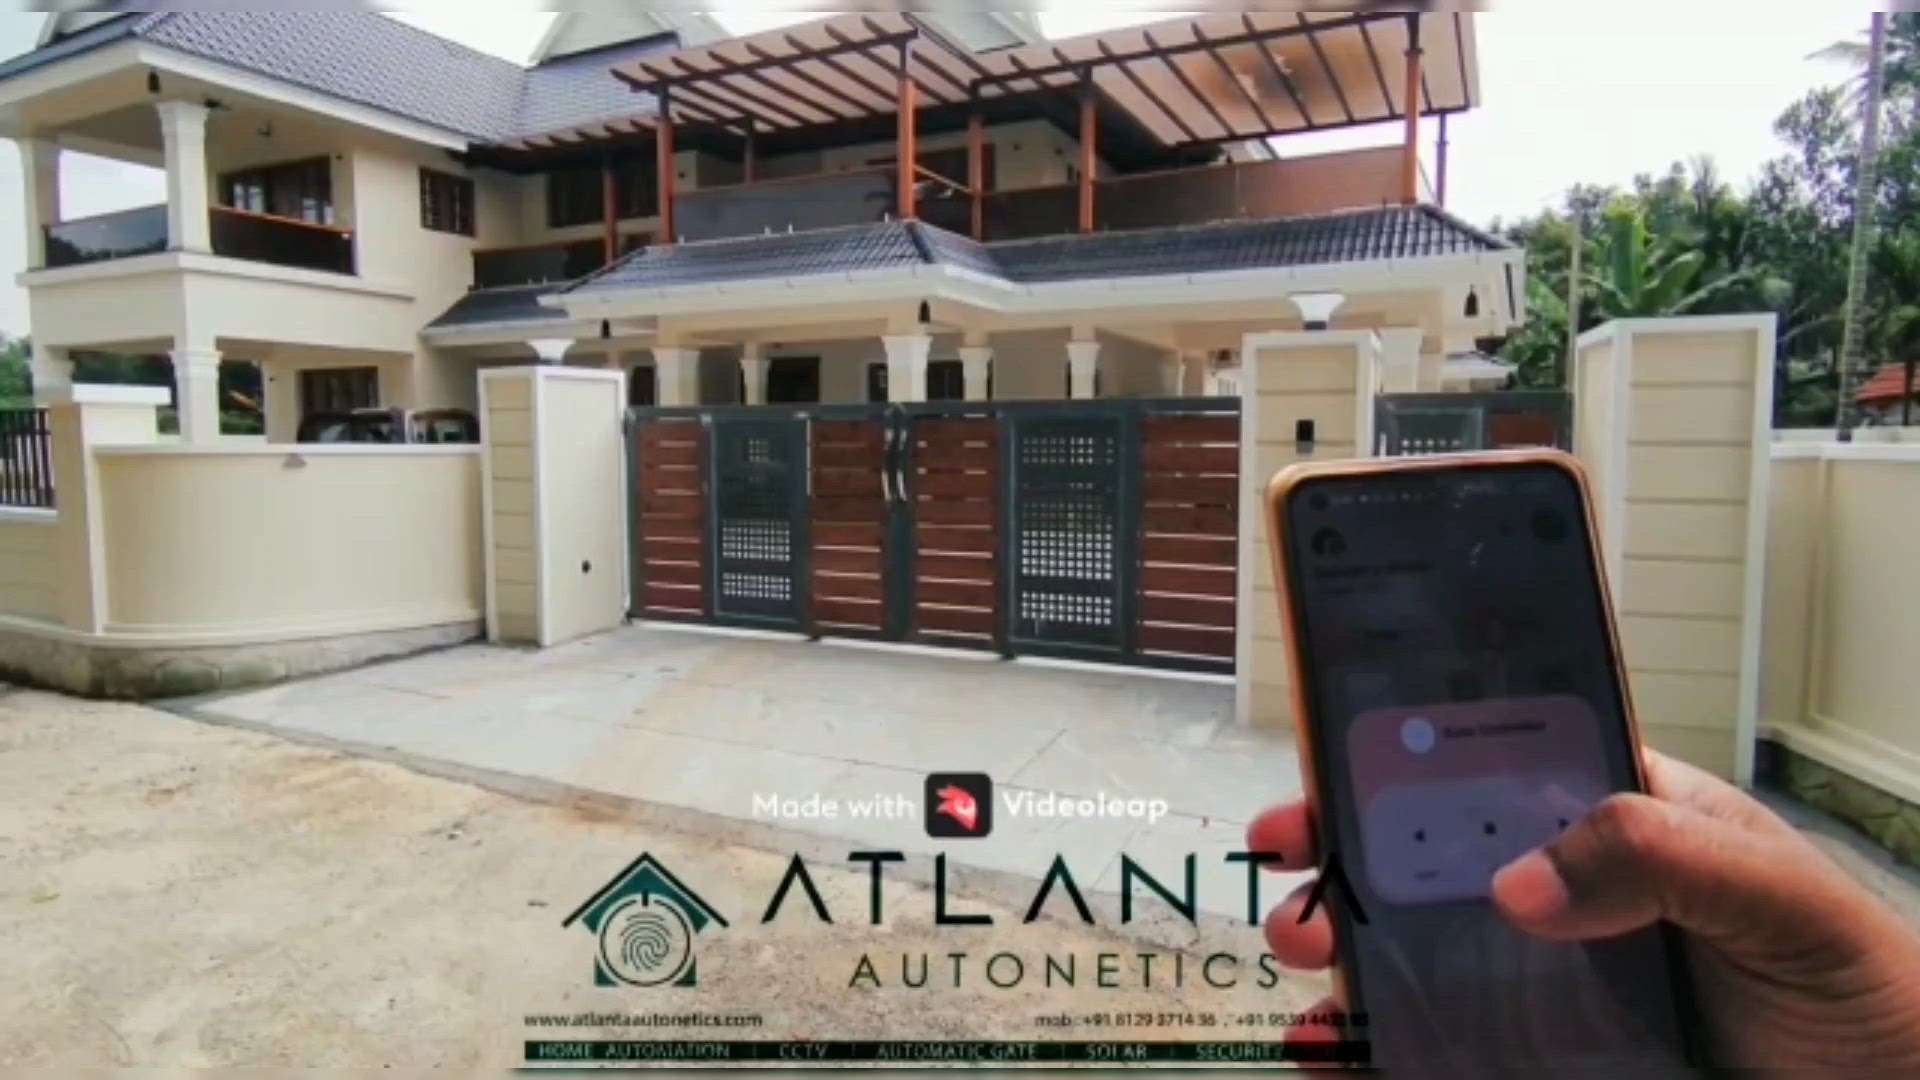 The first step to making your home into a Smart Home is choosing your assistant.
Atlanta take Pride in Serving You Better through 
Innovation.

1.Home  Automation 
2.Automatic Gate
3.CCTV
4.Solar System 
5.Security System 
6.Home Theatre 
7.Biometric Access Control 
8.Entertainment Solutions
9.Automated sprinkler s/m
10.Smart Lighting, etc

Contact us for a free demo.

+919539443395/ +918075058982  #architecturedesigns  #Architectural&Interior  #ContemporaryHouse  # #BuildingSupplies  #HomeAutomation  #automaticglassdoors  #automaticgate  #cctvcamera  #GlassDoors  #automationsolution  #automationindustry  #automaticroofing  # #crowncazzio_building_design_and_construction  #CivilEngineer  #KeralaStyleHouse